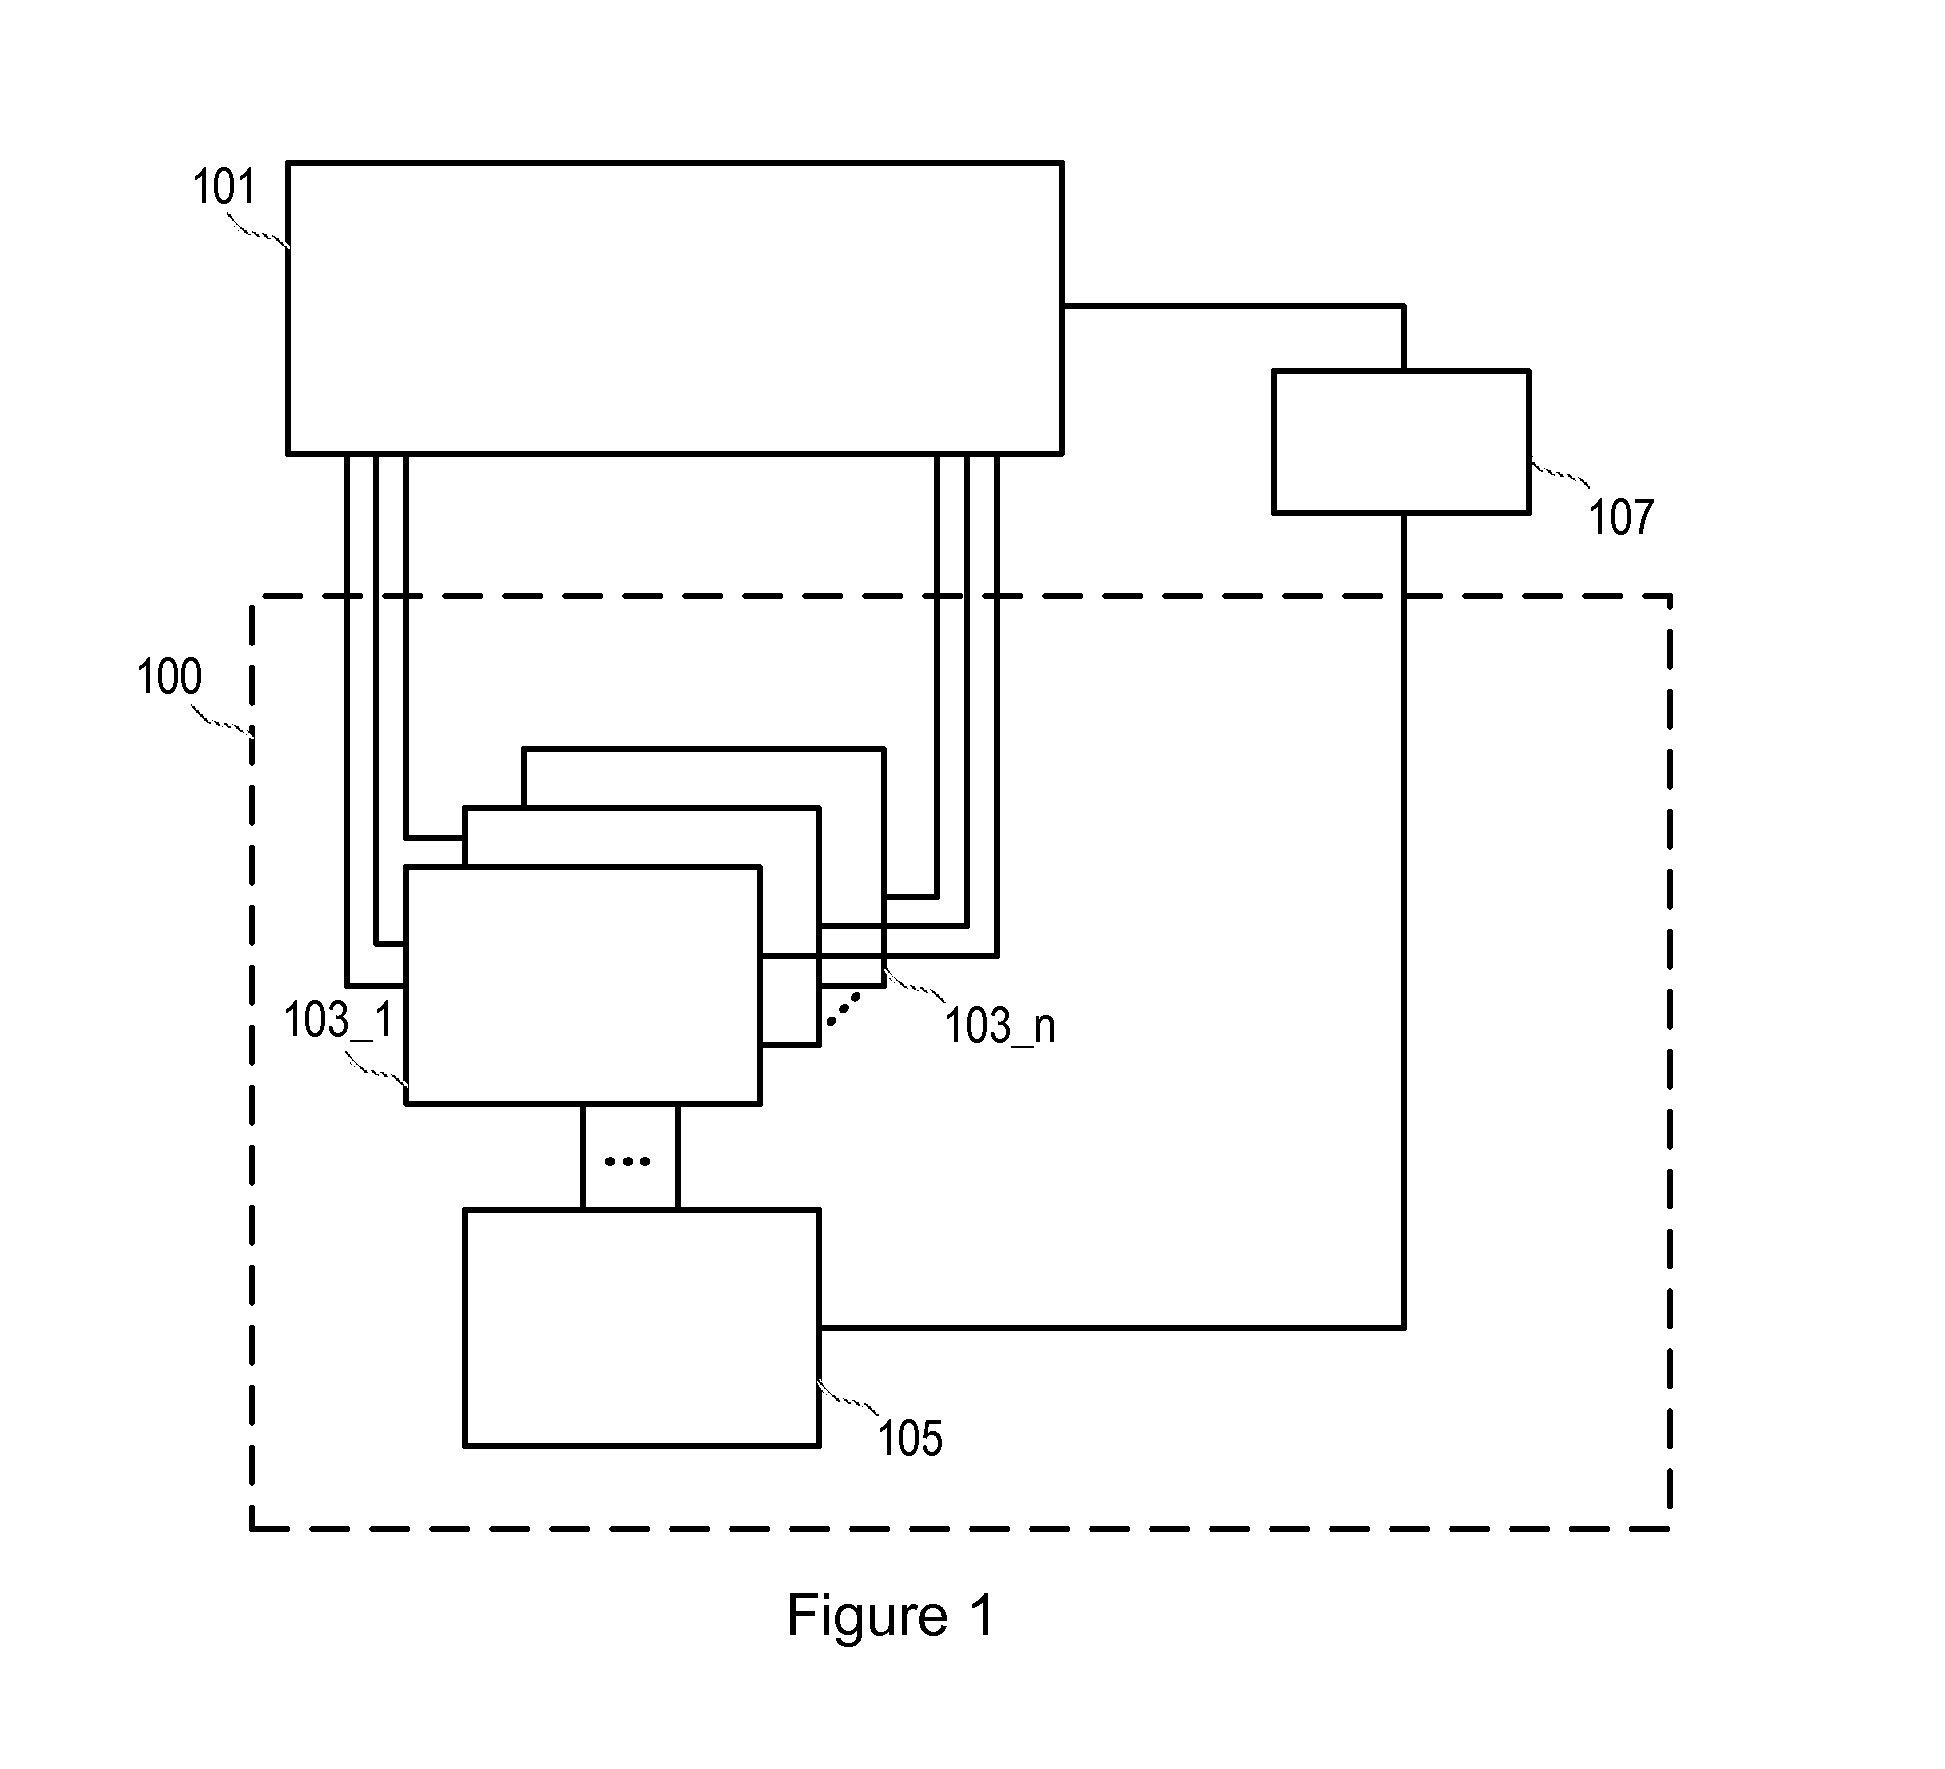 Method and Apparatus for Monitoring Timing of Critical Paths